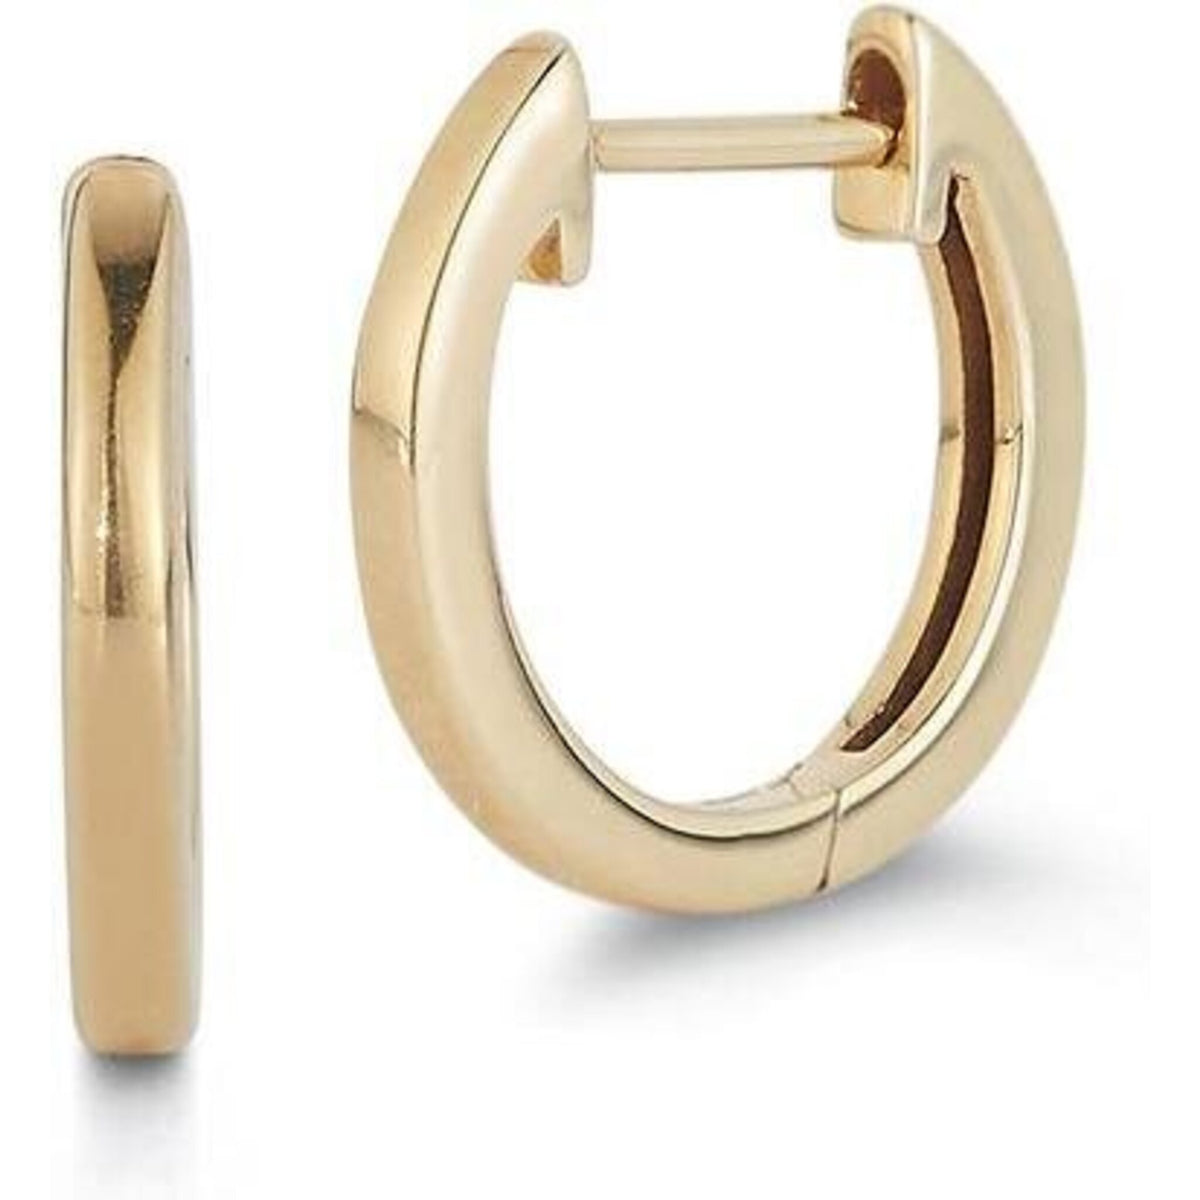 Sofer Jewelry - Yellow Gold Huggie Earrings in 14K Yellow Gold